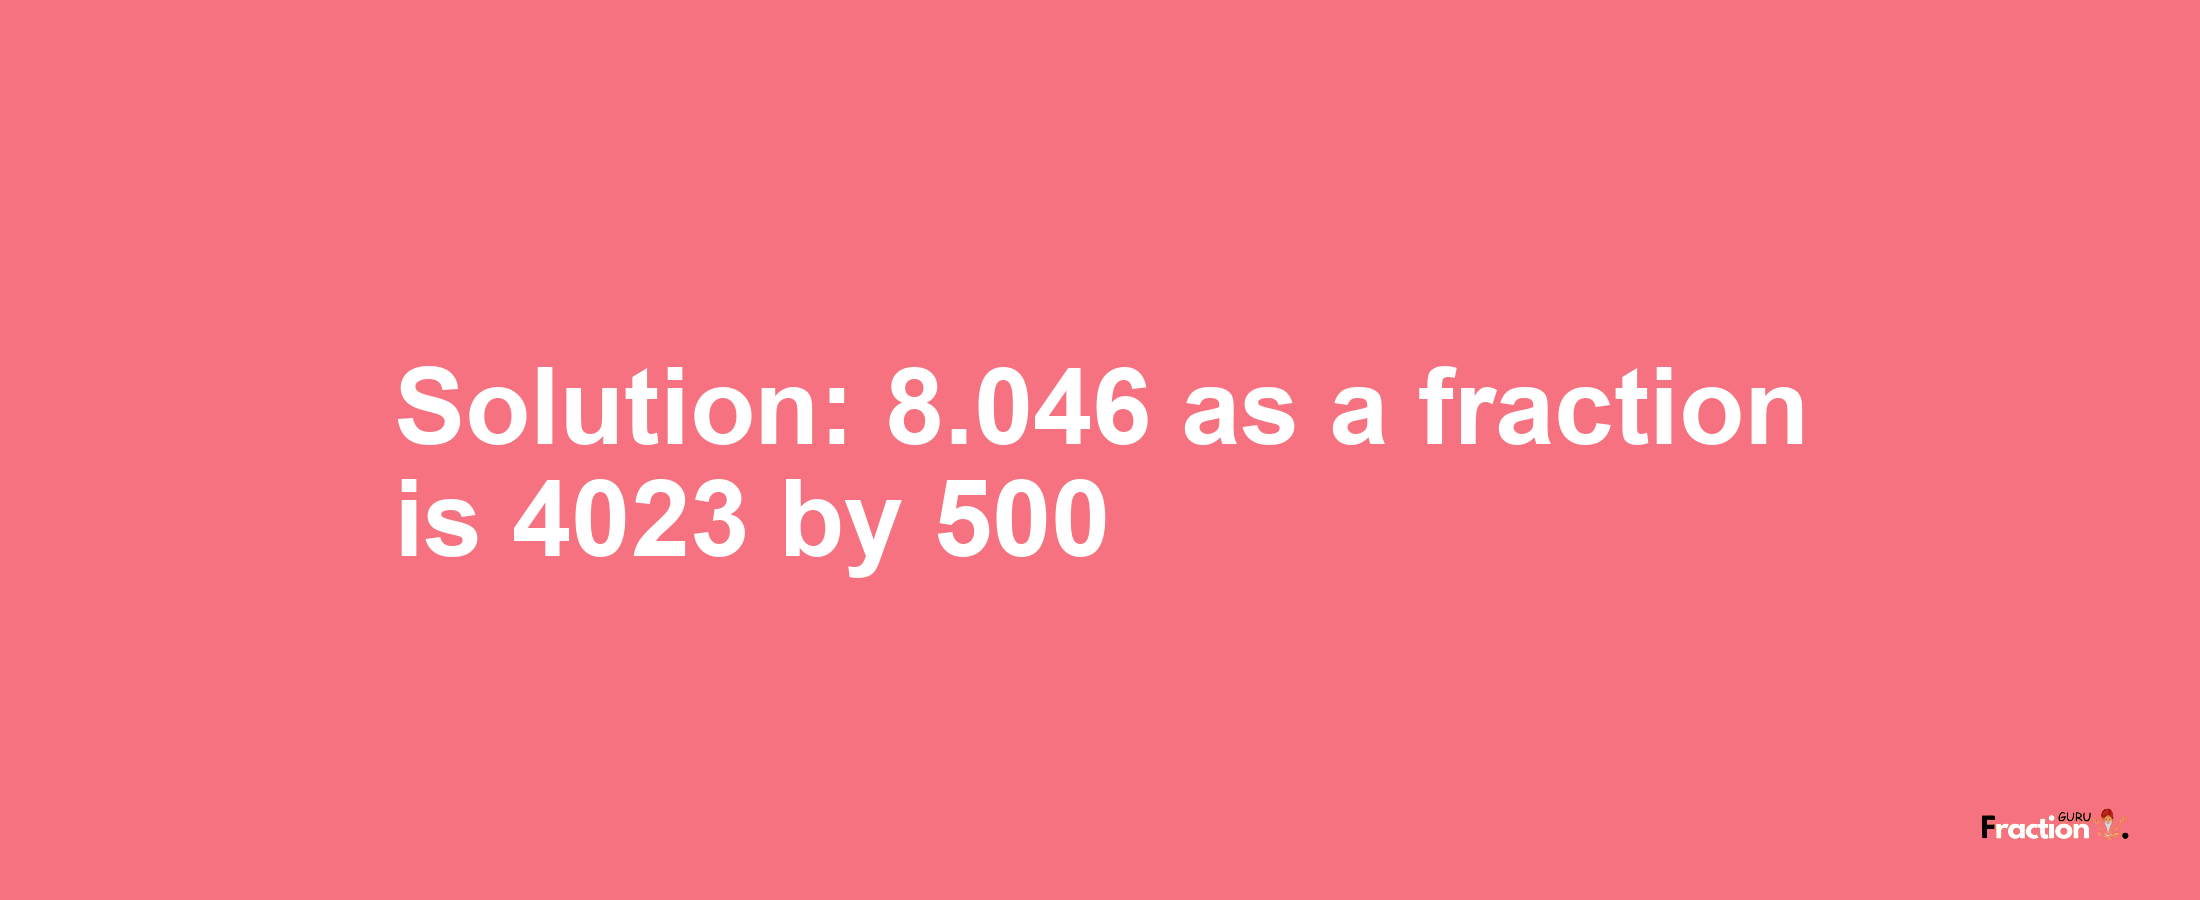 Solution:8.046 as a fraction is 4023/500